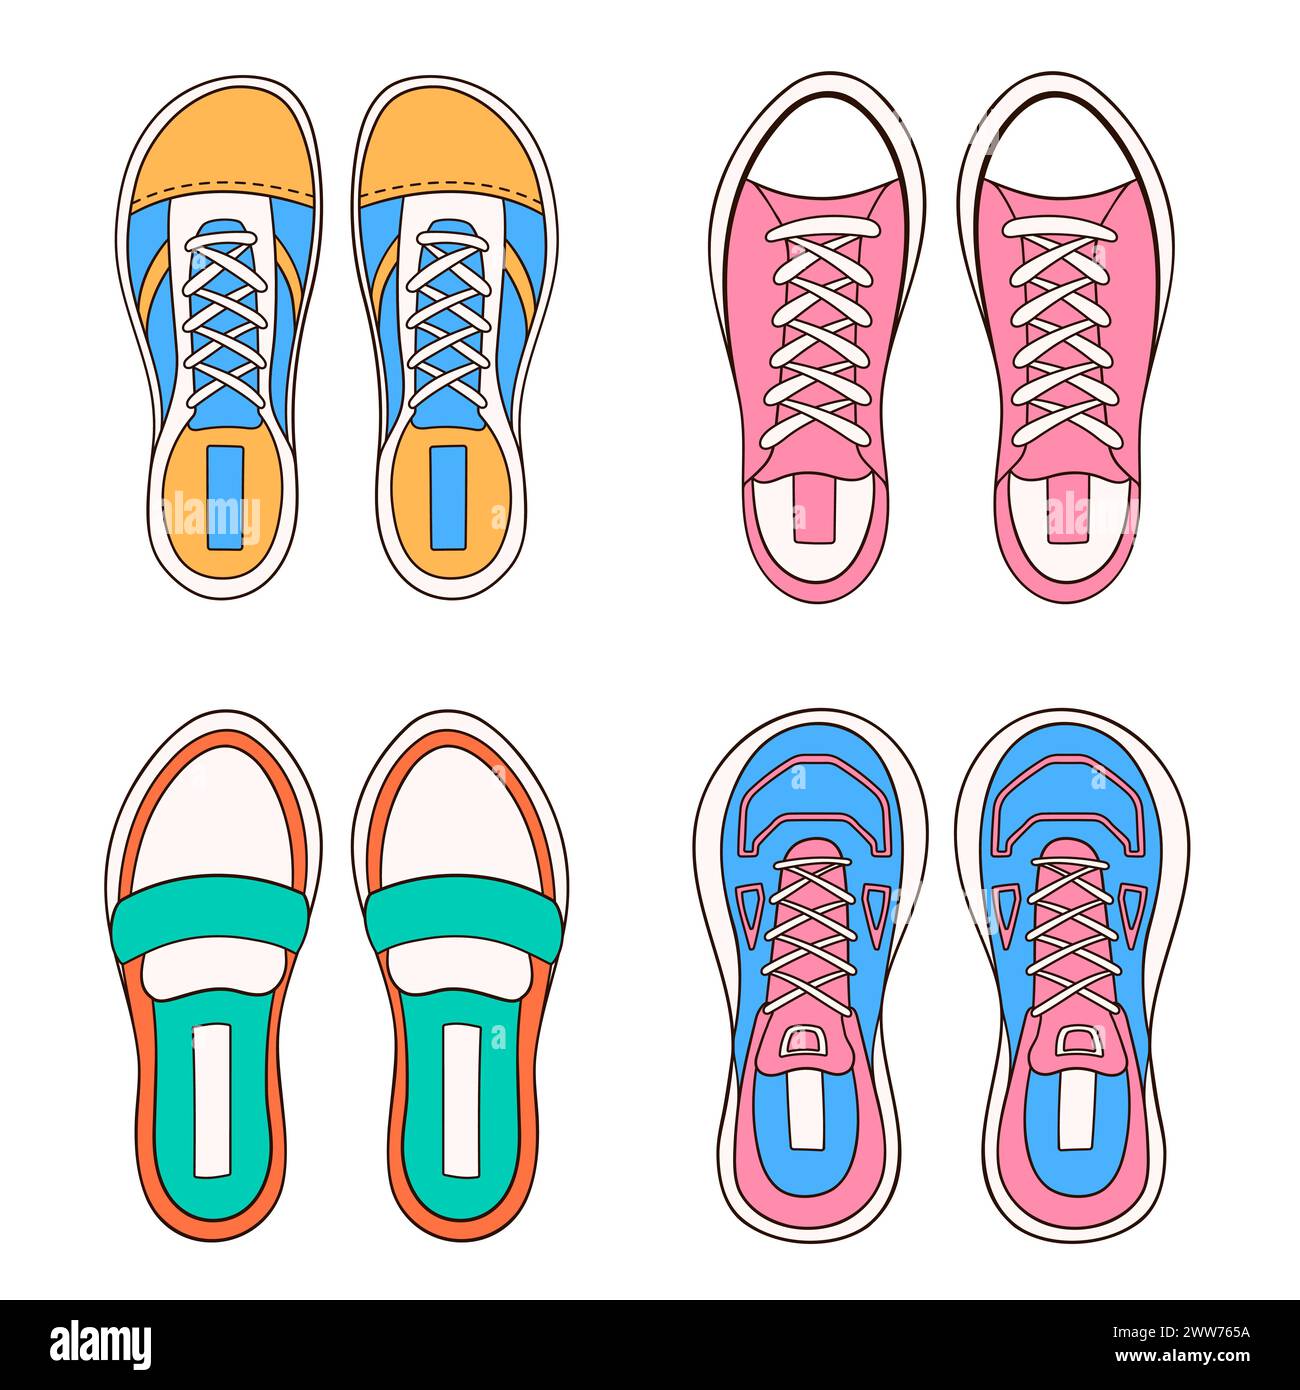 Female, women sneakers set in cartoon style. Hand drawn casual shoes icon. Vector illustration isolated on a white background. Stock Vector